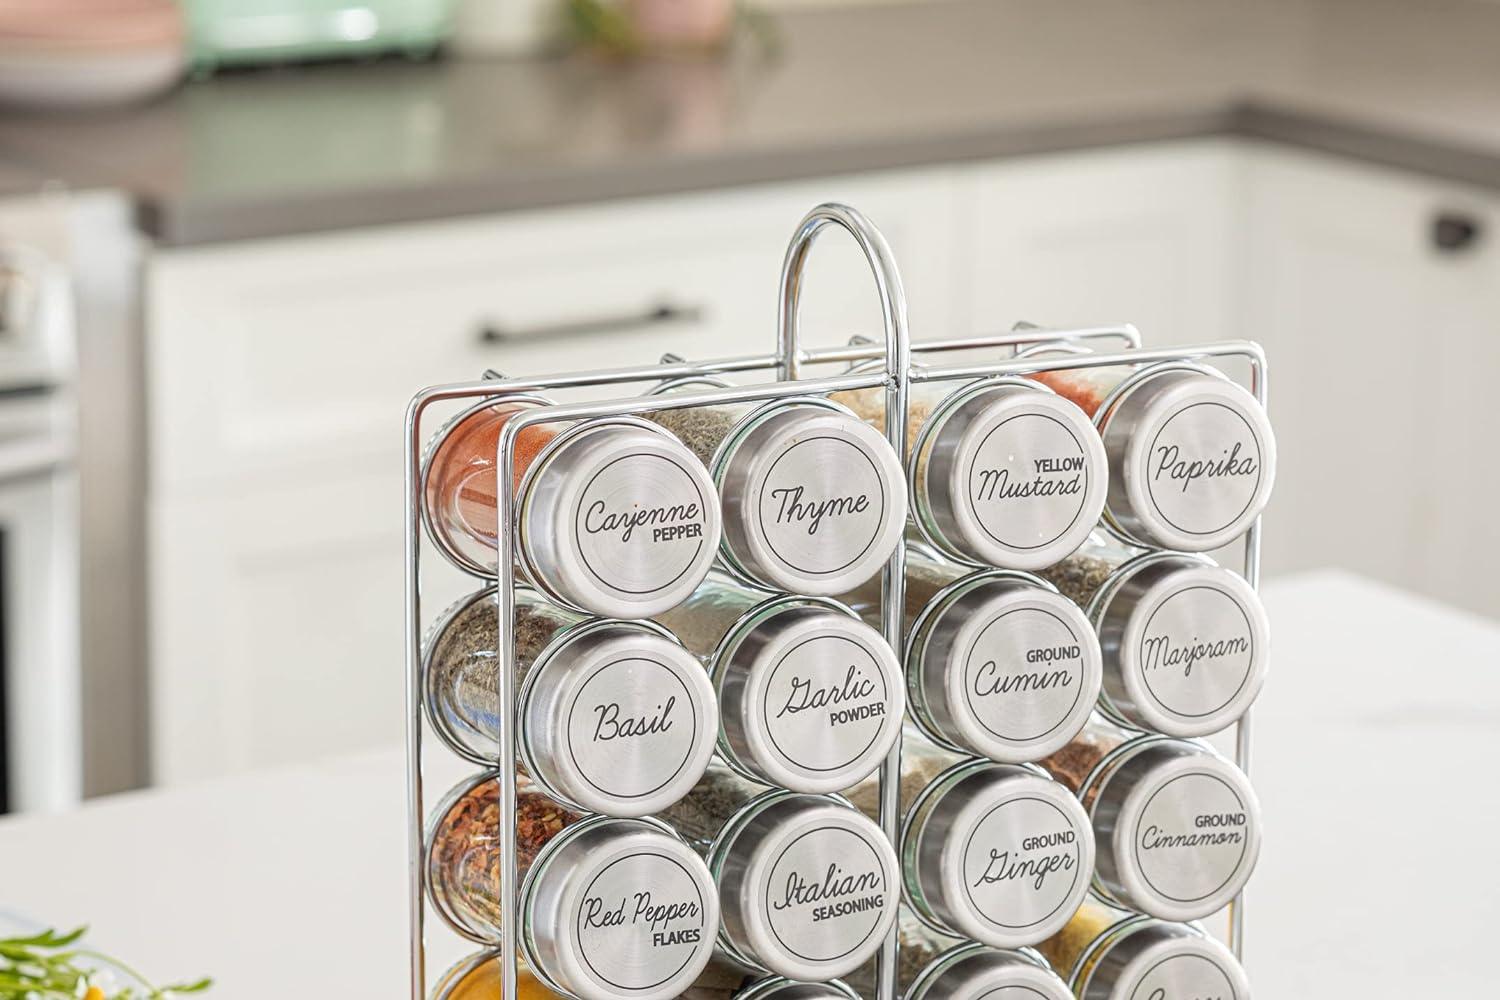 20 Jar Spice Rack Stainless Steel Filled with Spices - Standing Rack Shelf Holder & Countertop Spice Rack Tower Organizer for Kitchen Spices with Free Spice Refills for 5 Years